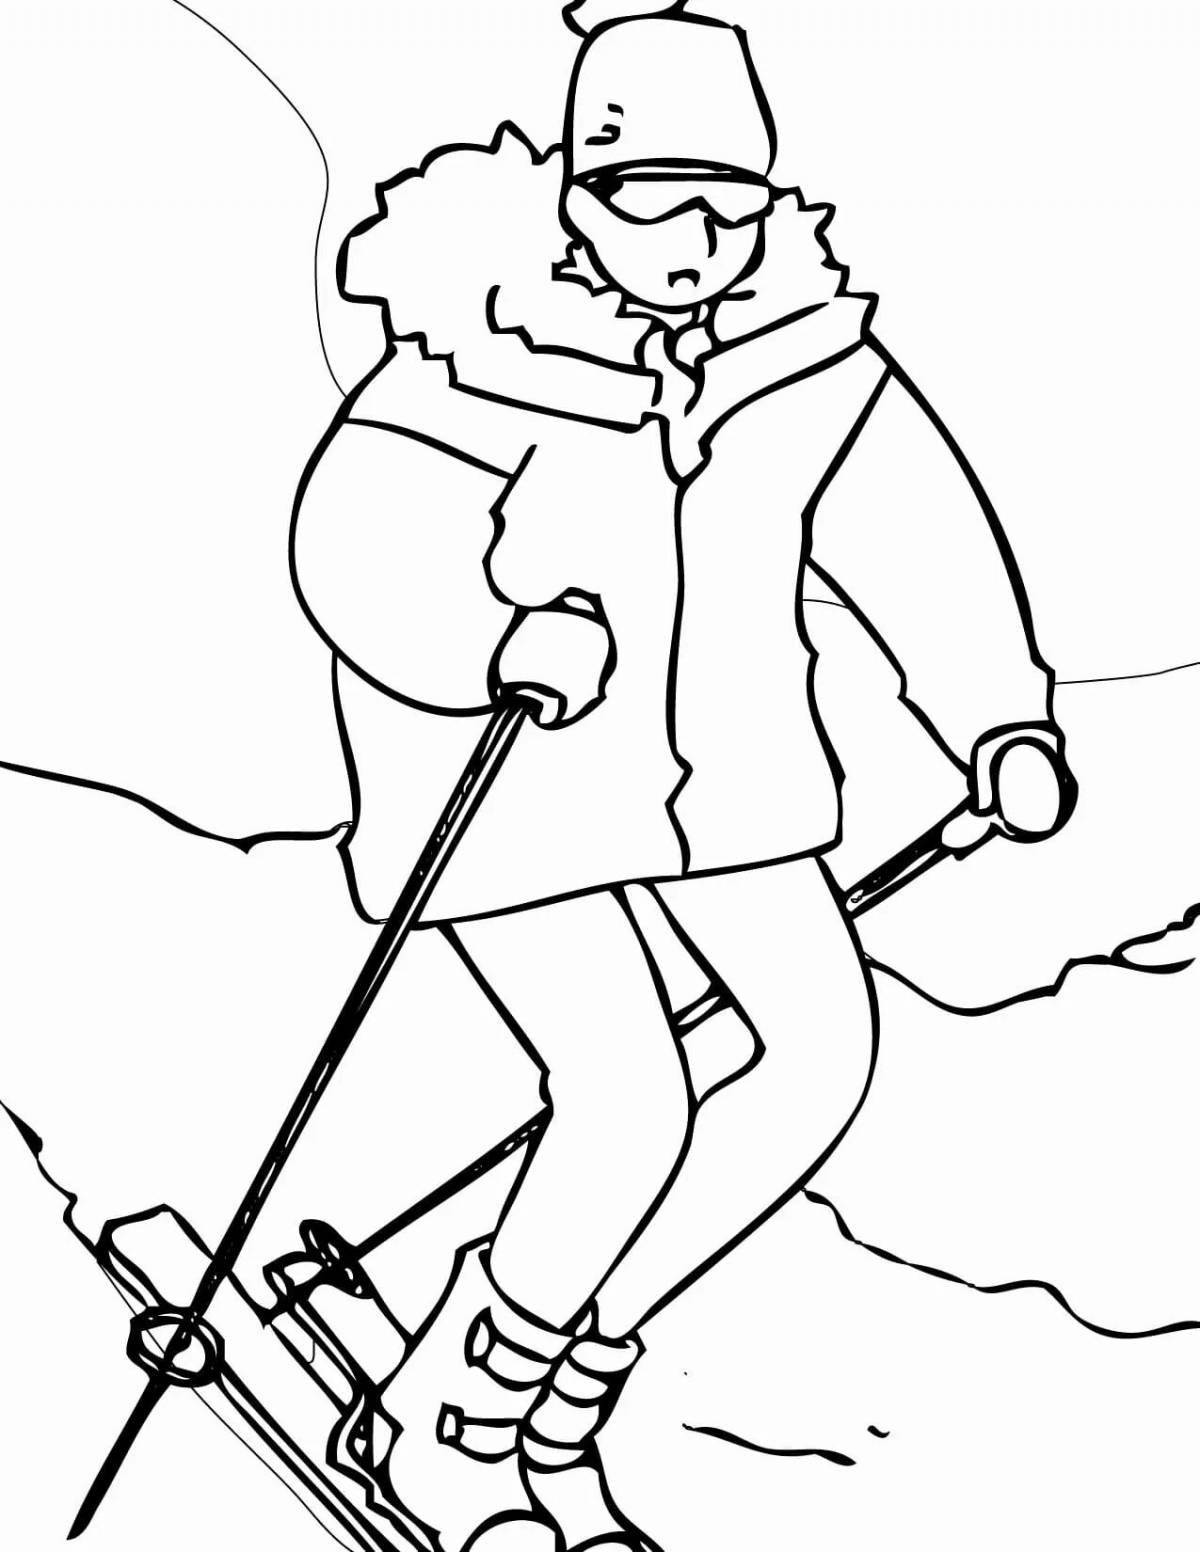 Fascinating coloring book for skiing